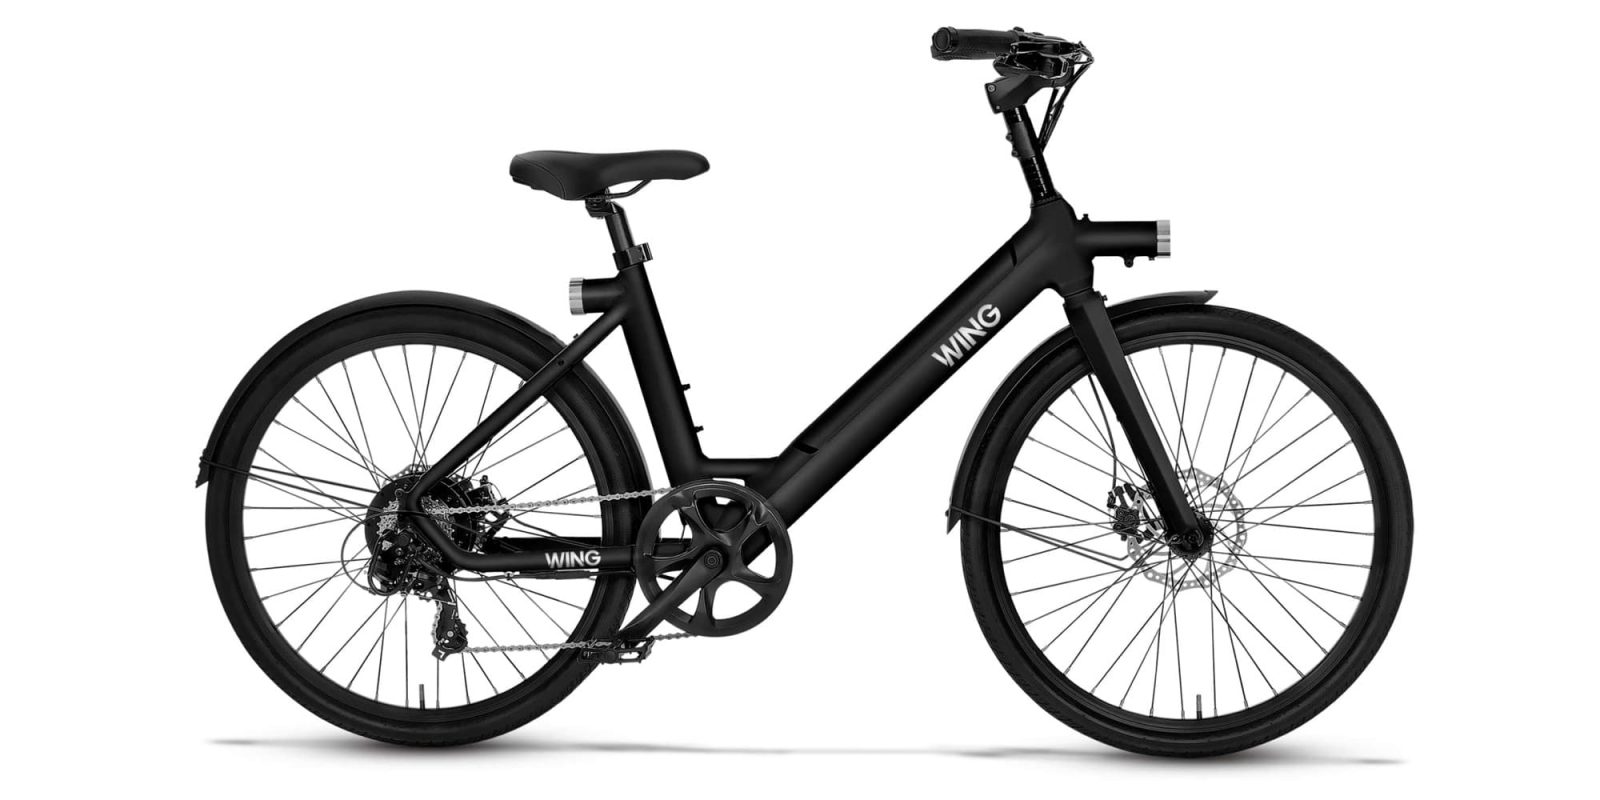 Wing Bikes launches 25 MPH Freedom ST electric bike with sub-40 lb weight